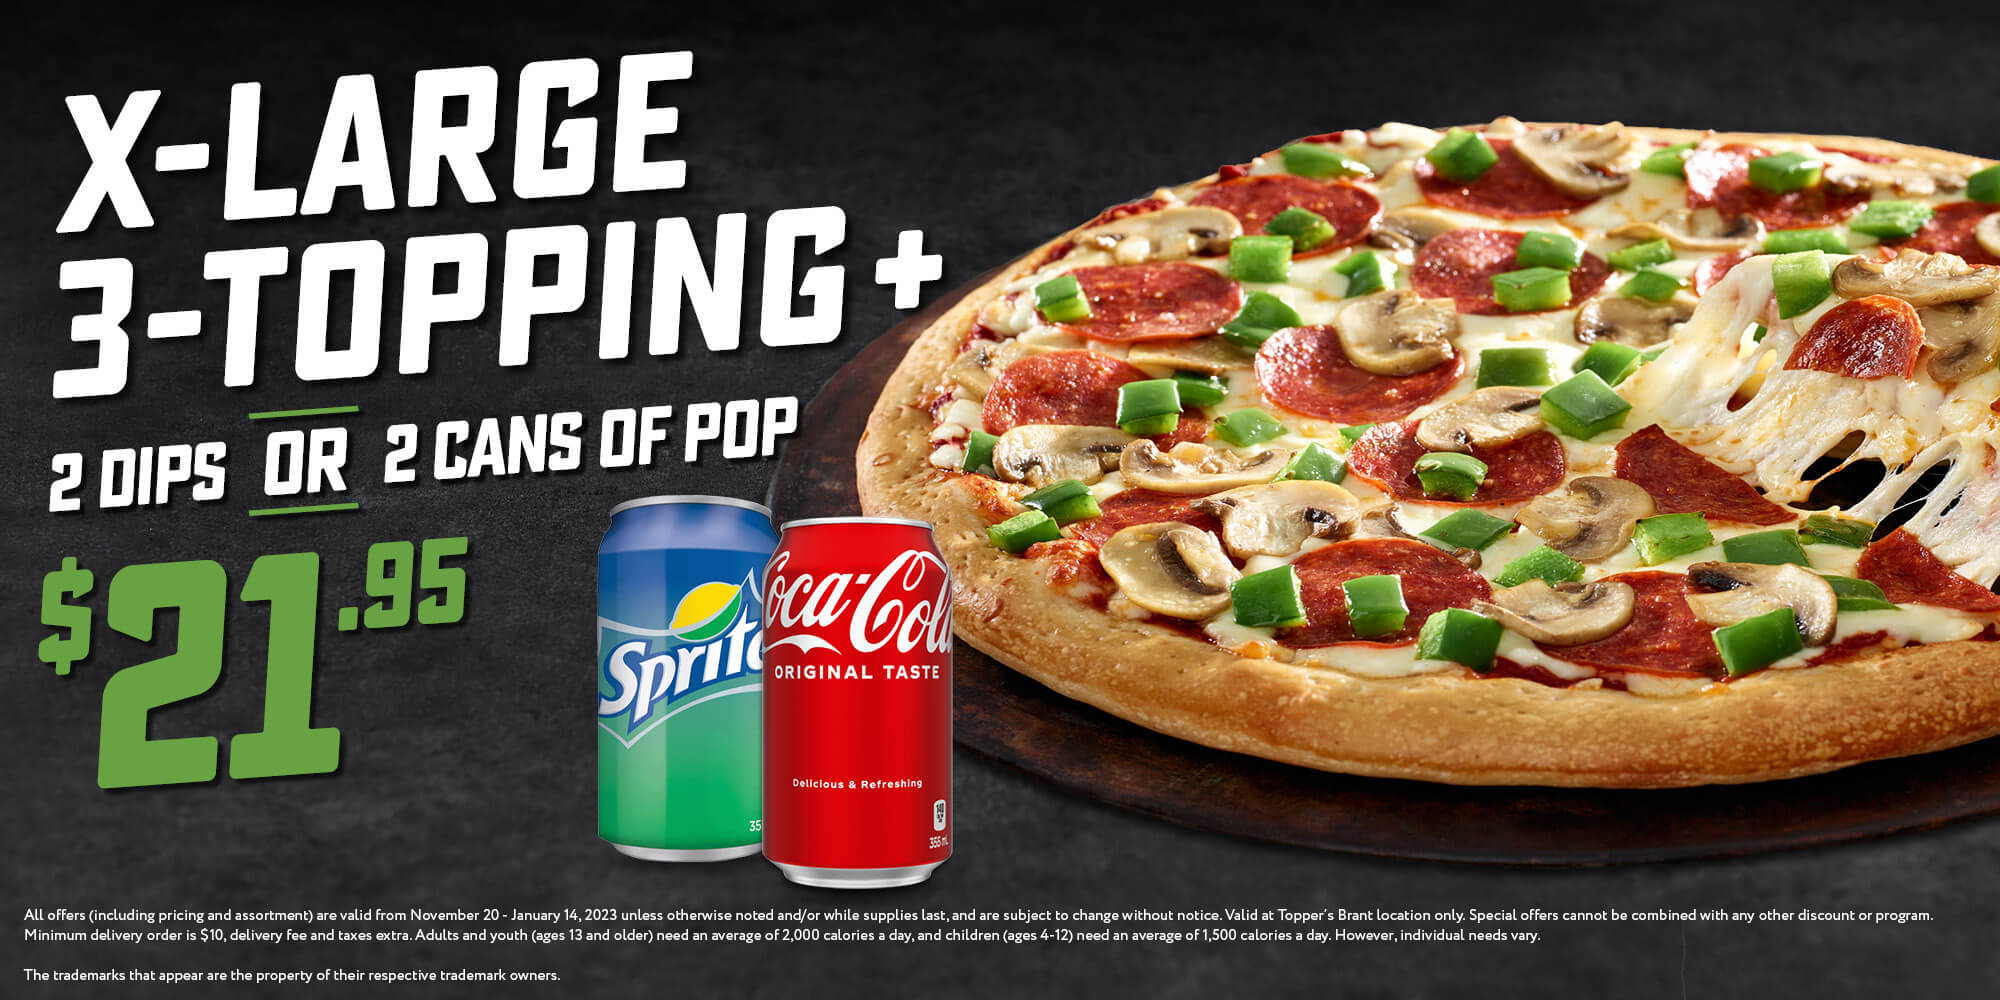 X-Large 3 Topping + 2 Dips/2 Cans for $21.95